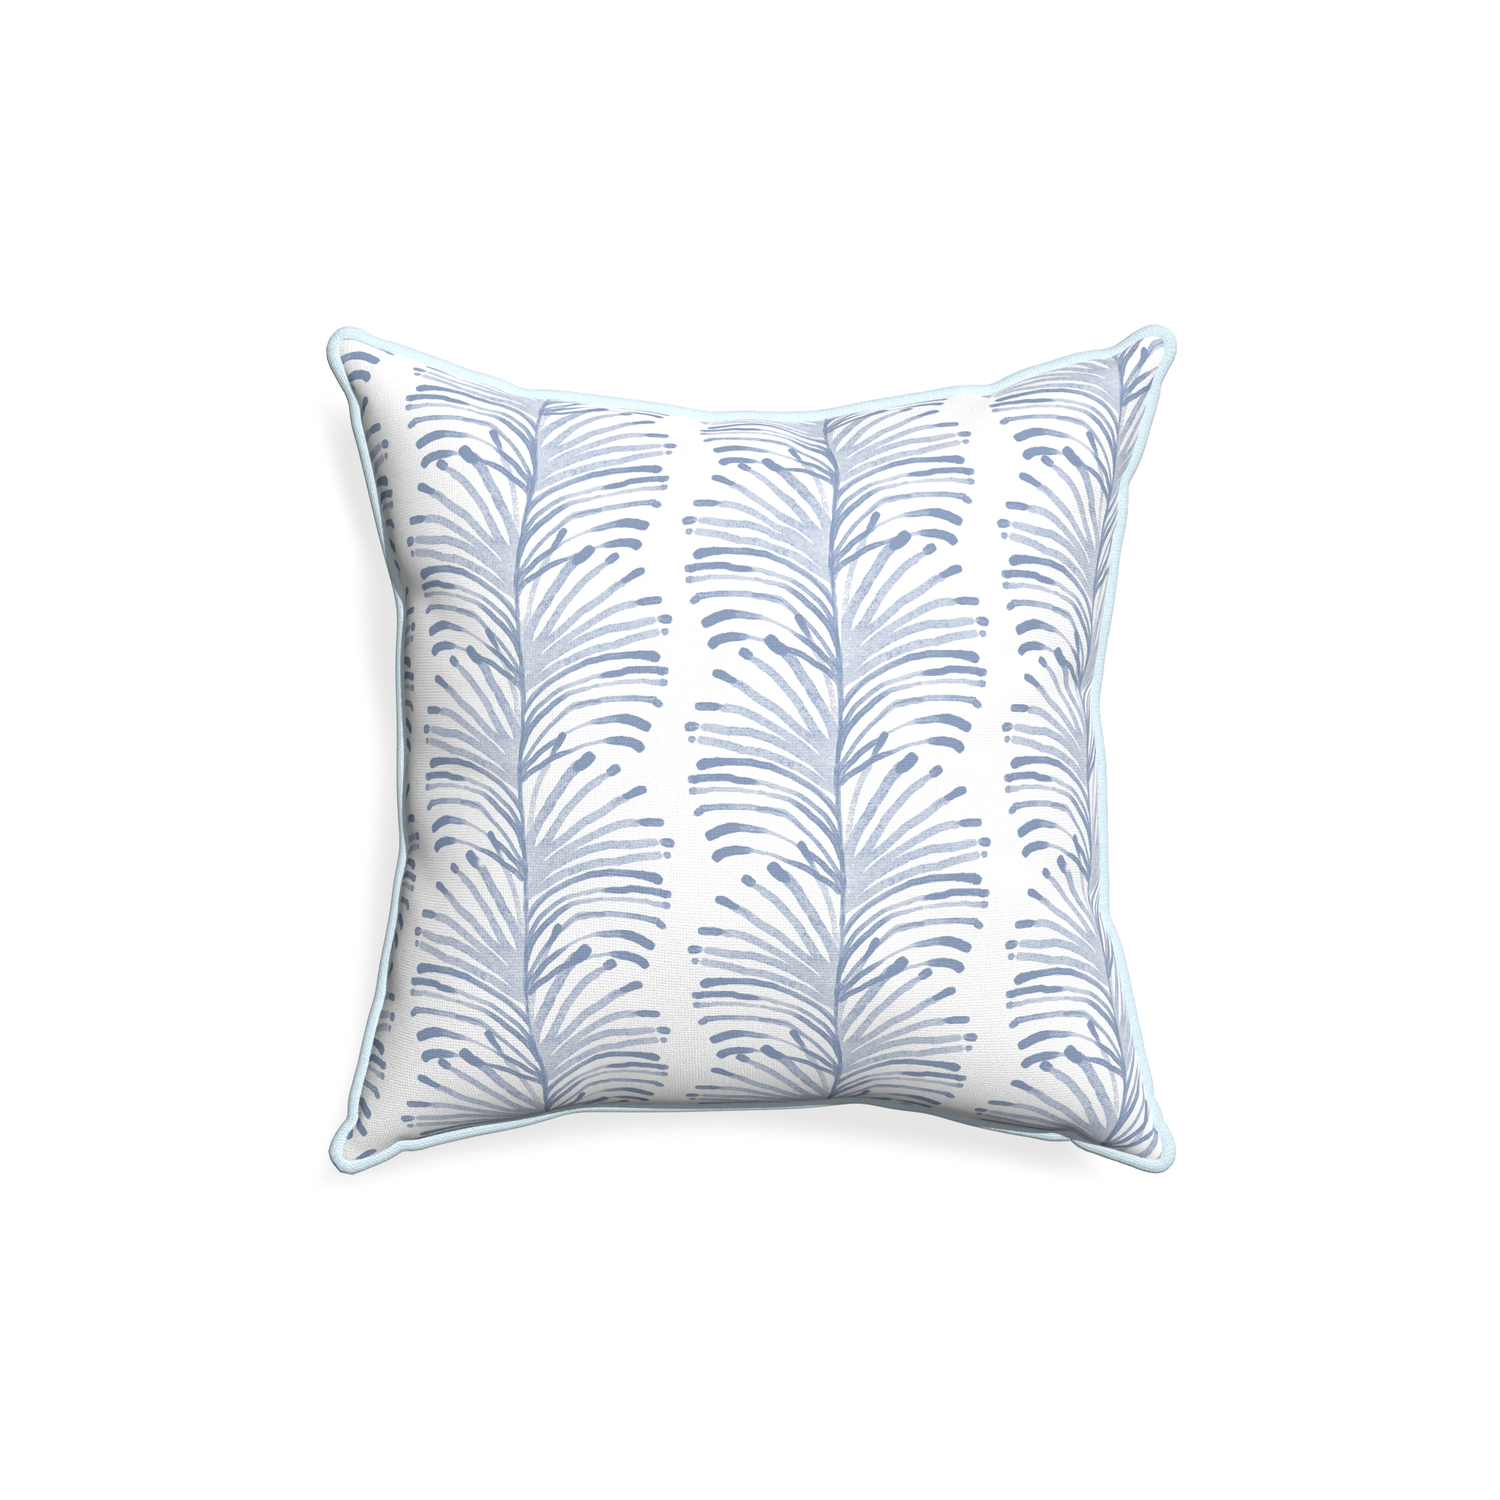 18-square emma sky custom sky blue botanical stripepillow with powder piping on white background